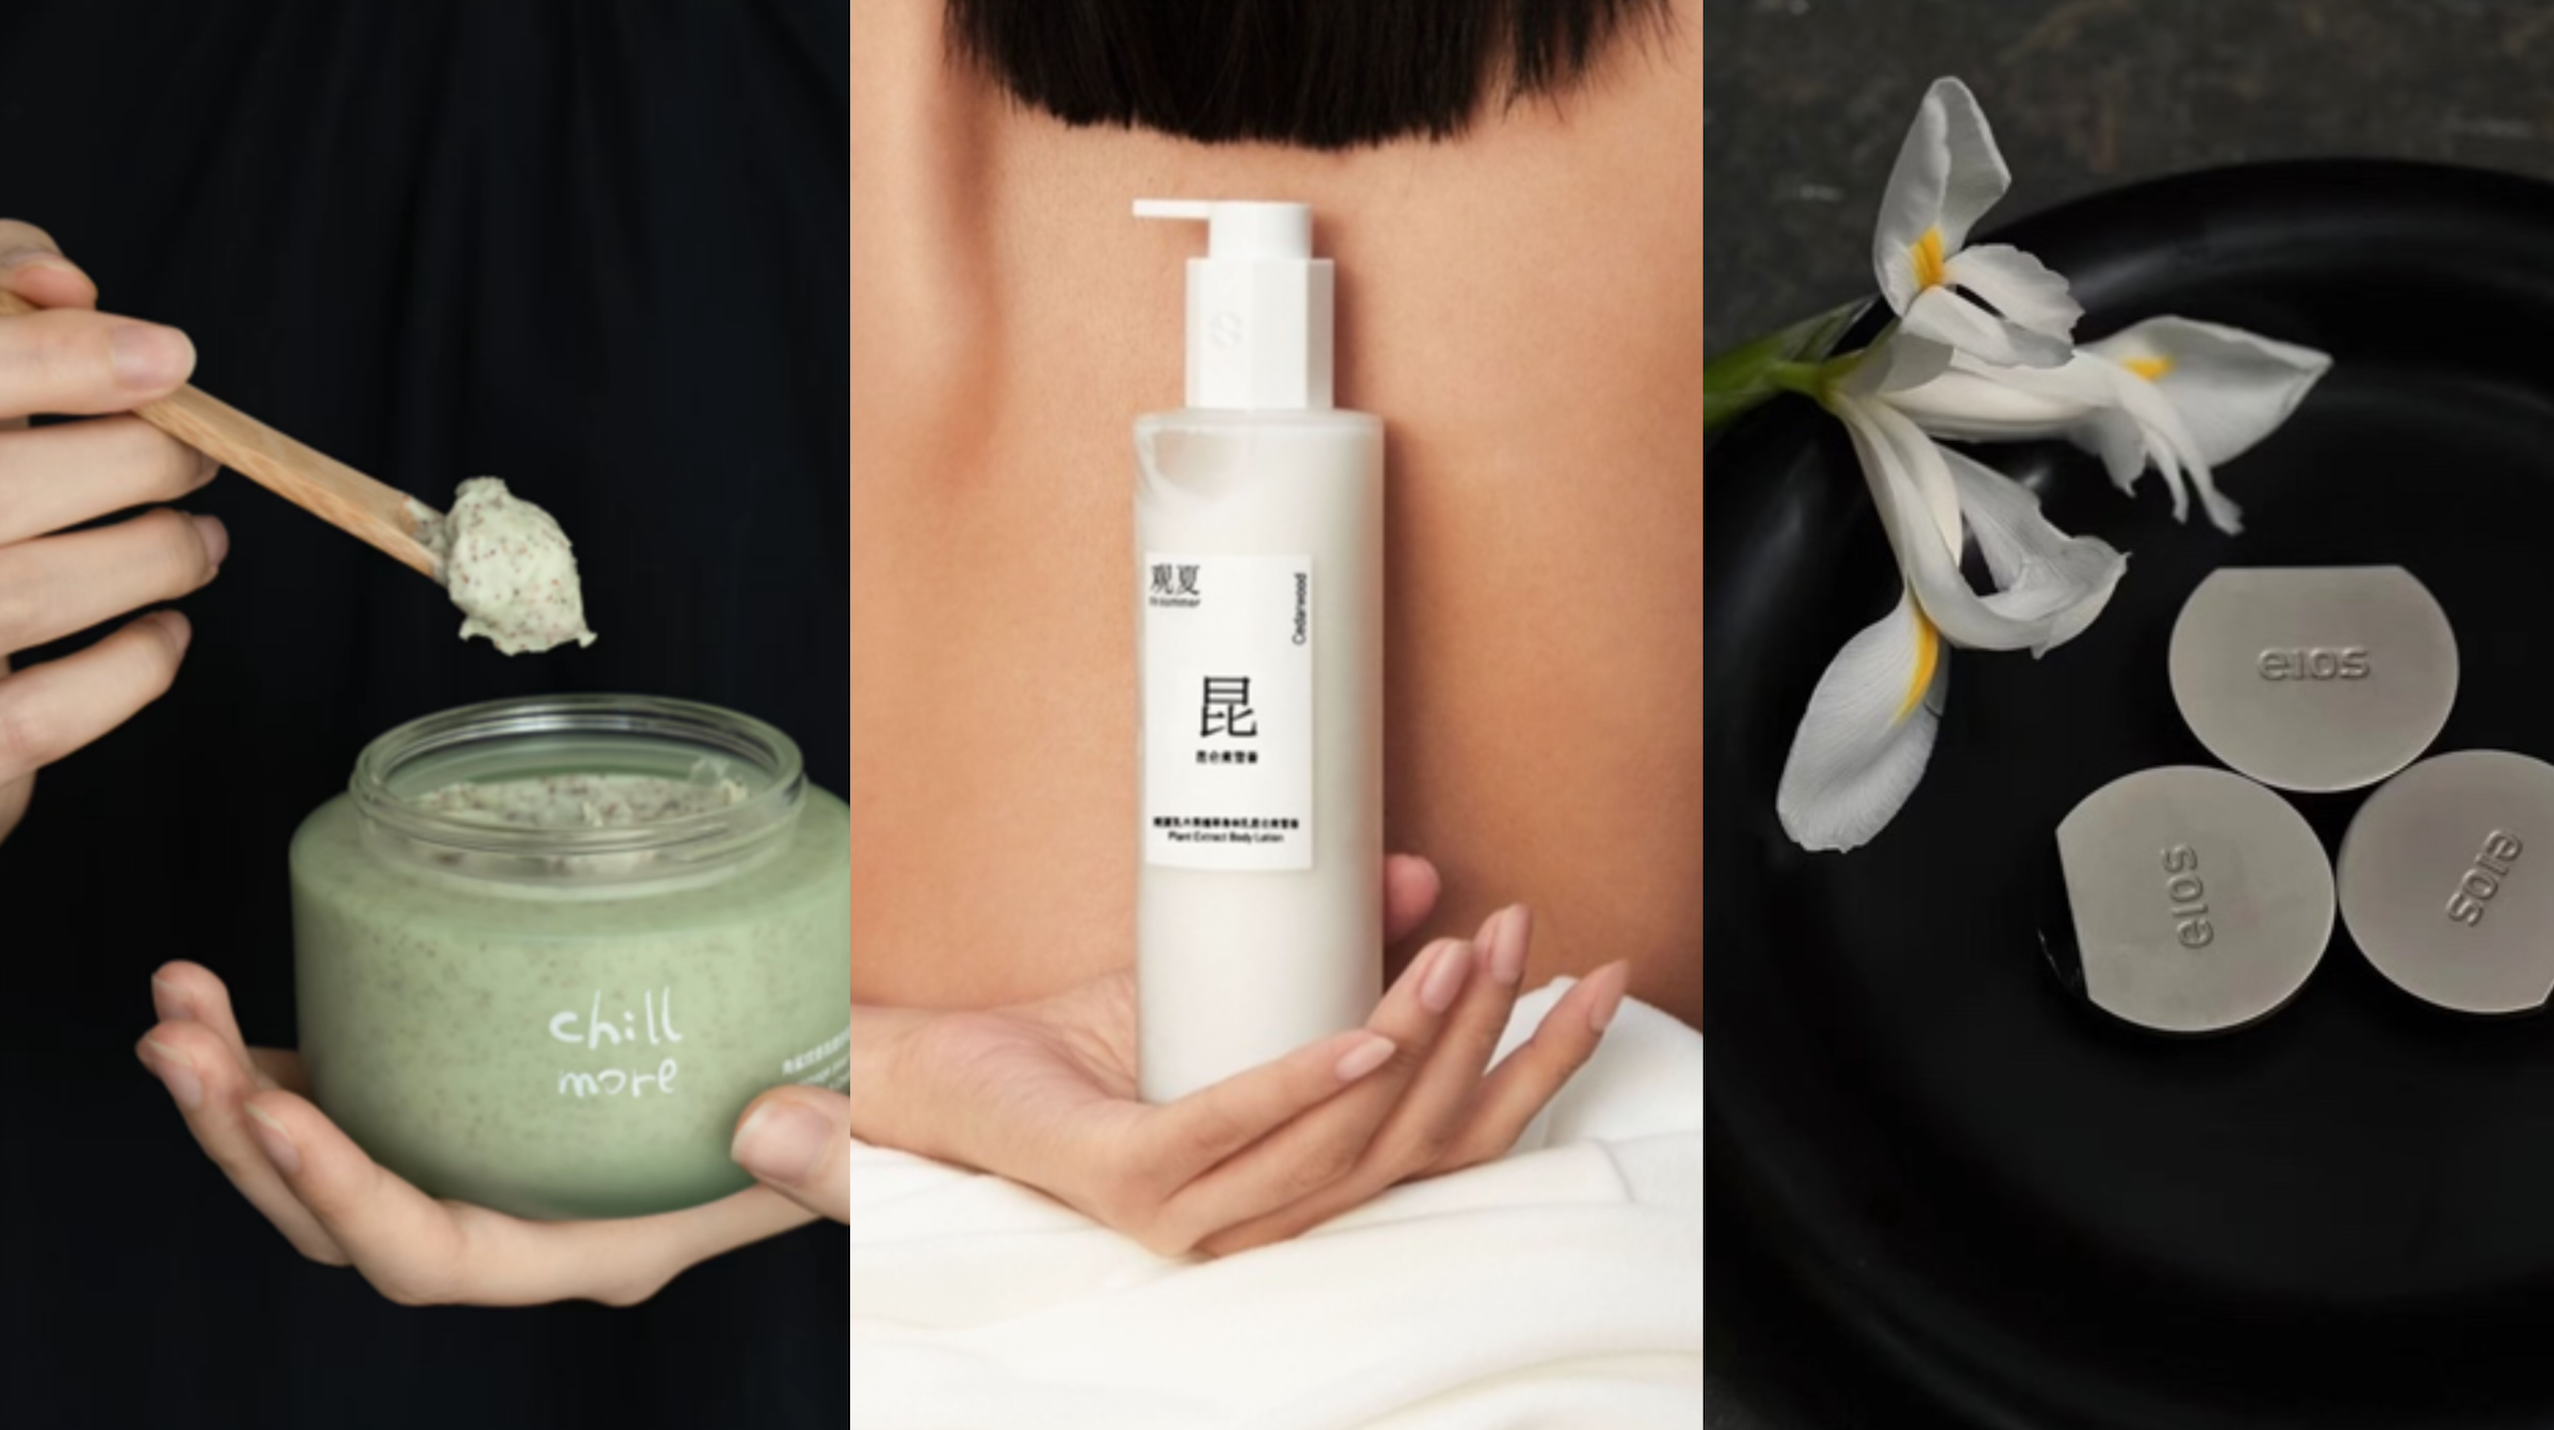 Body skincare has become a symbol of self-love for sophisticated young Chinese consumers. Discover the C-beauty brands riding on this trend. Image: Chillmore, To Summer, Eios